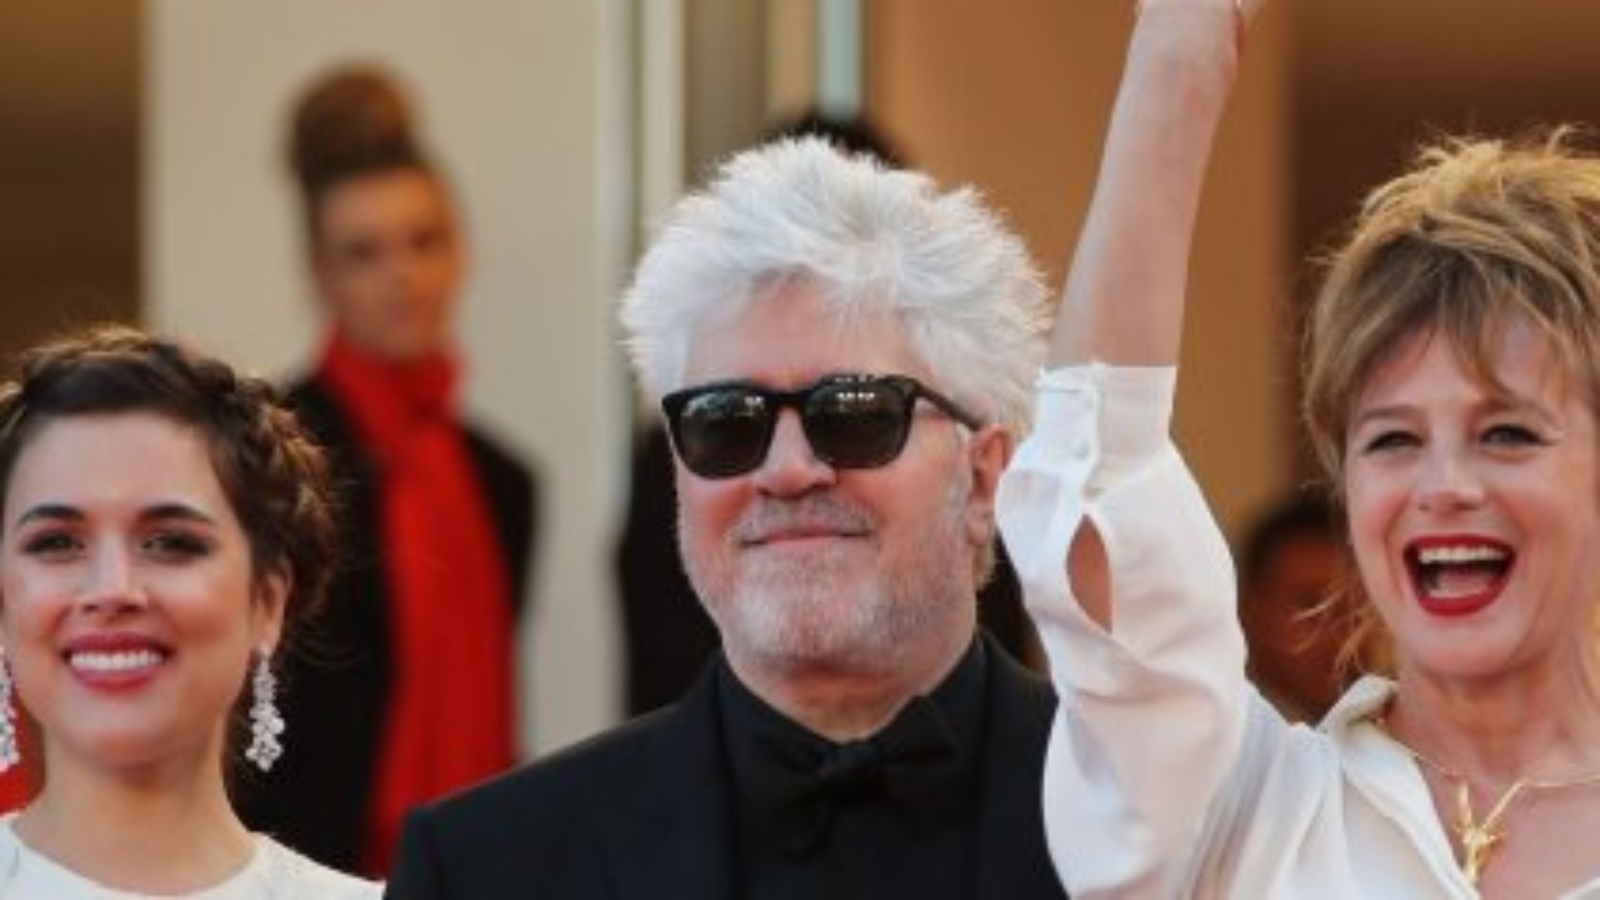 (From L) Spanish actress Adriana Ugarte, Spanish director Pedro Almodovar and Spanish actress Emma Suarez pose as they arrive on May 17, 2016 for the screening of the film "Julieta" at the 69th Cannes Film Festival in Cannes, southern France.  / AFP PHOTO / Valery HACHE